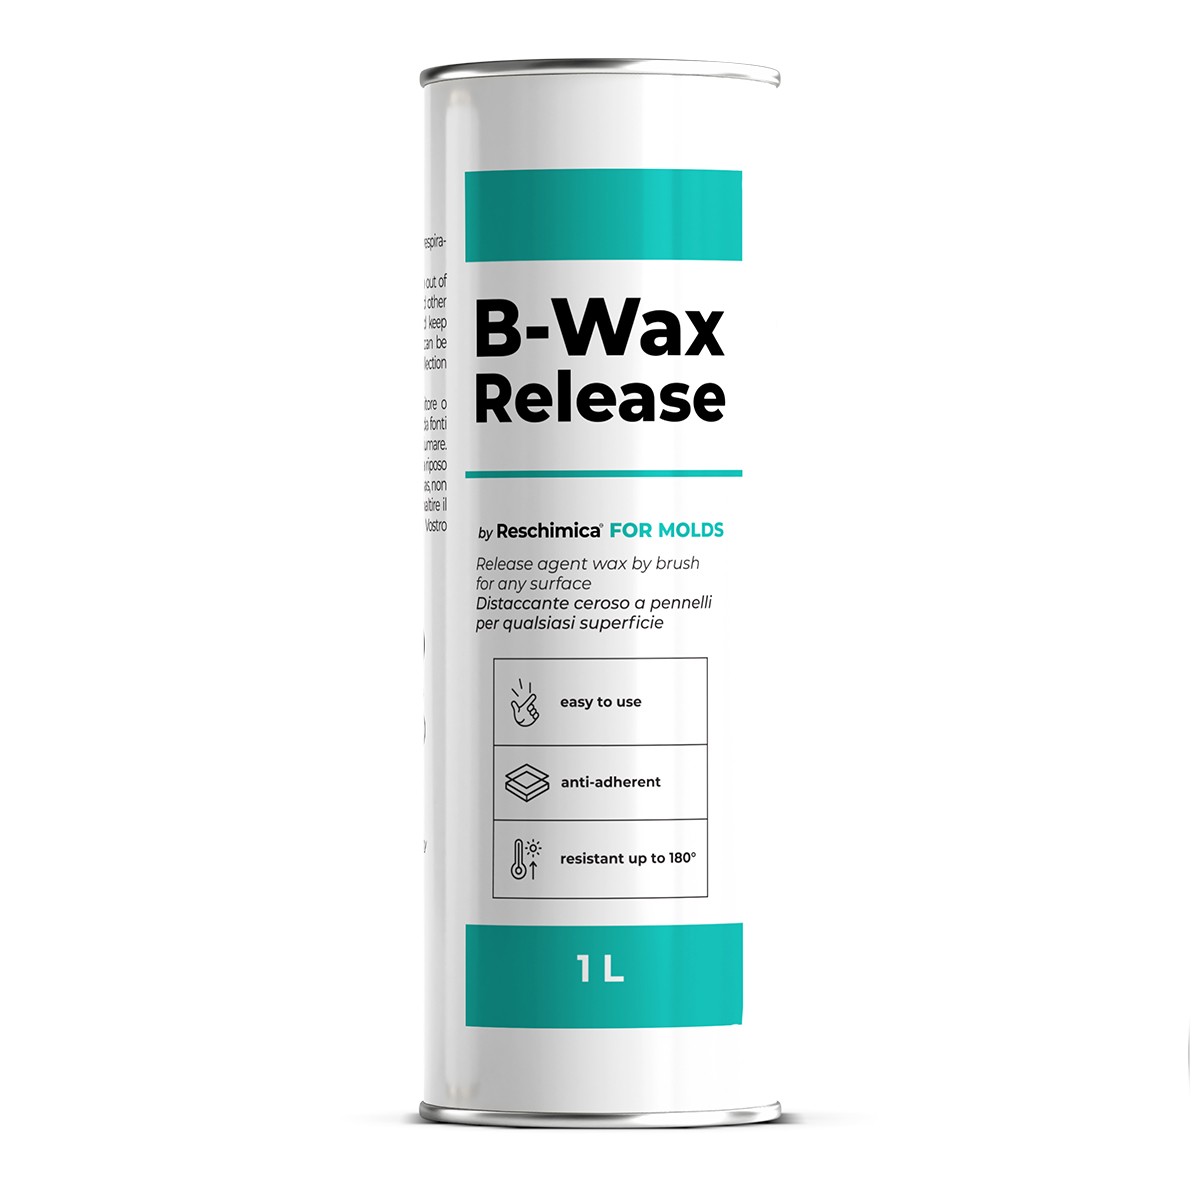 B-WAX RELEASE - Release agent by brush